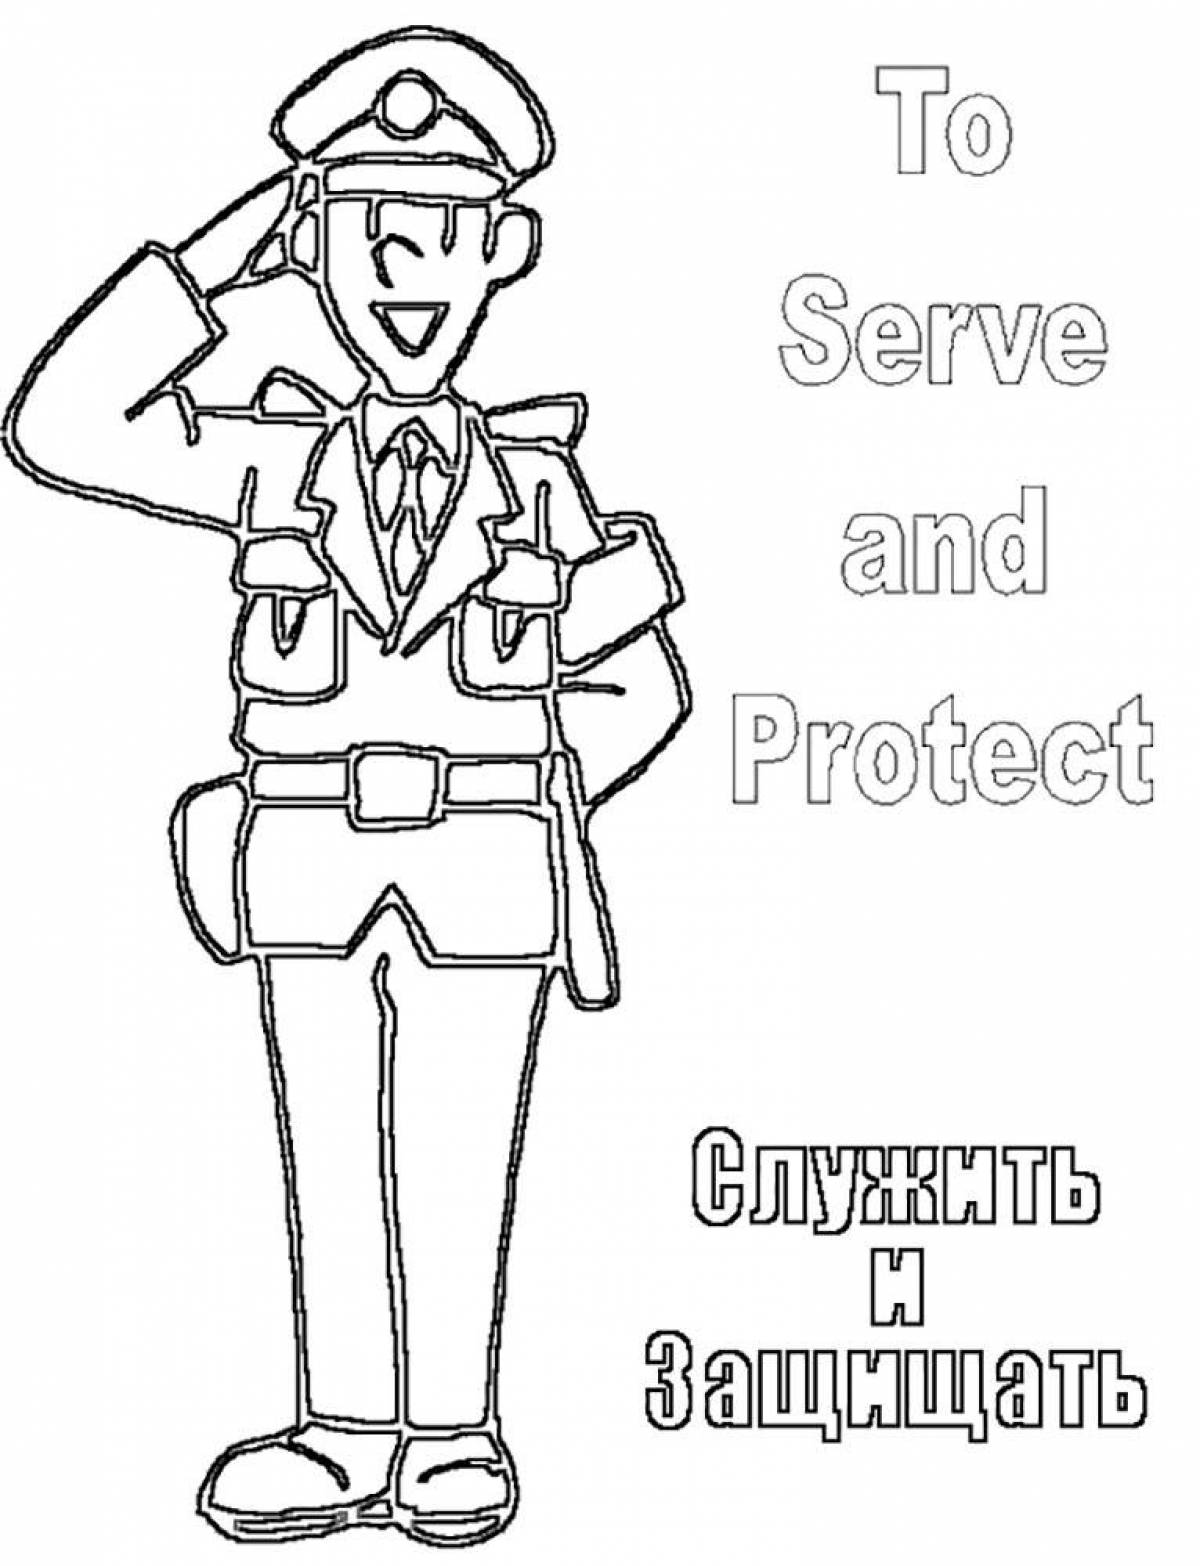 Fearless cop coloring page